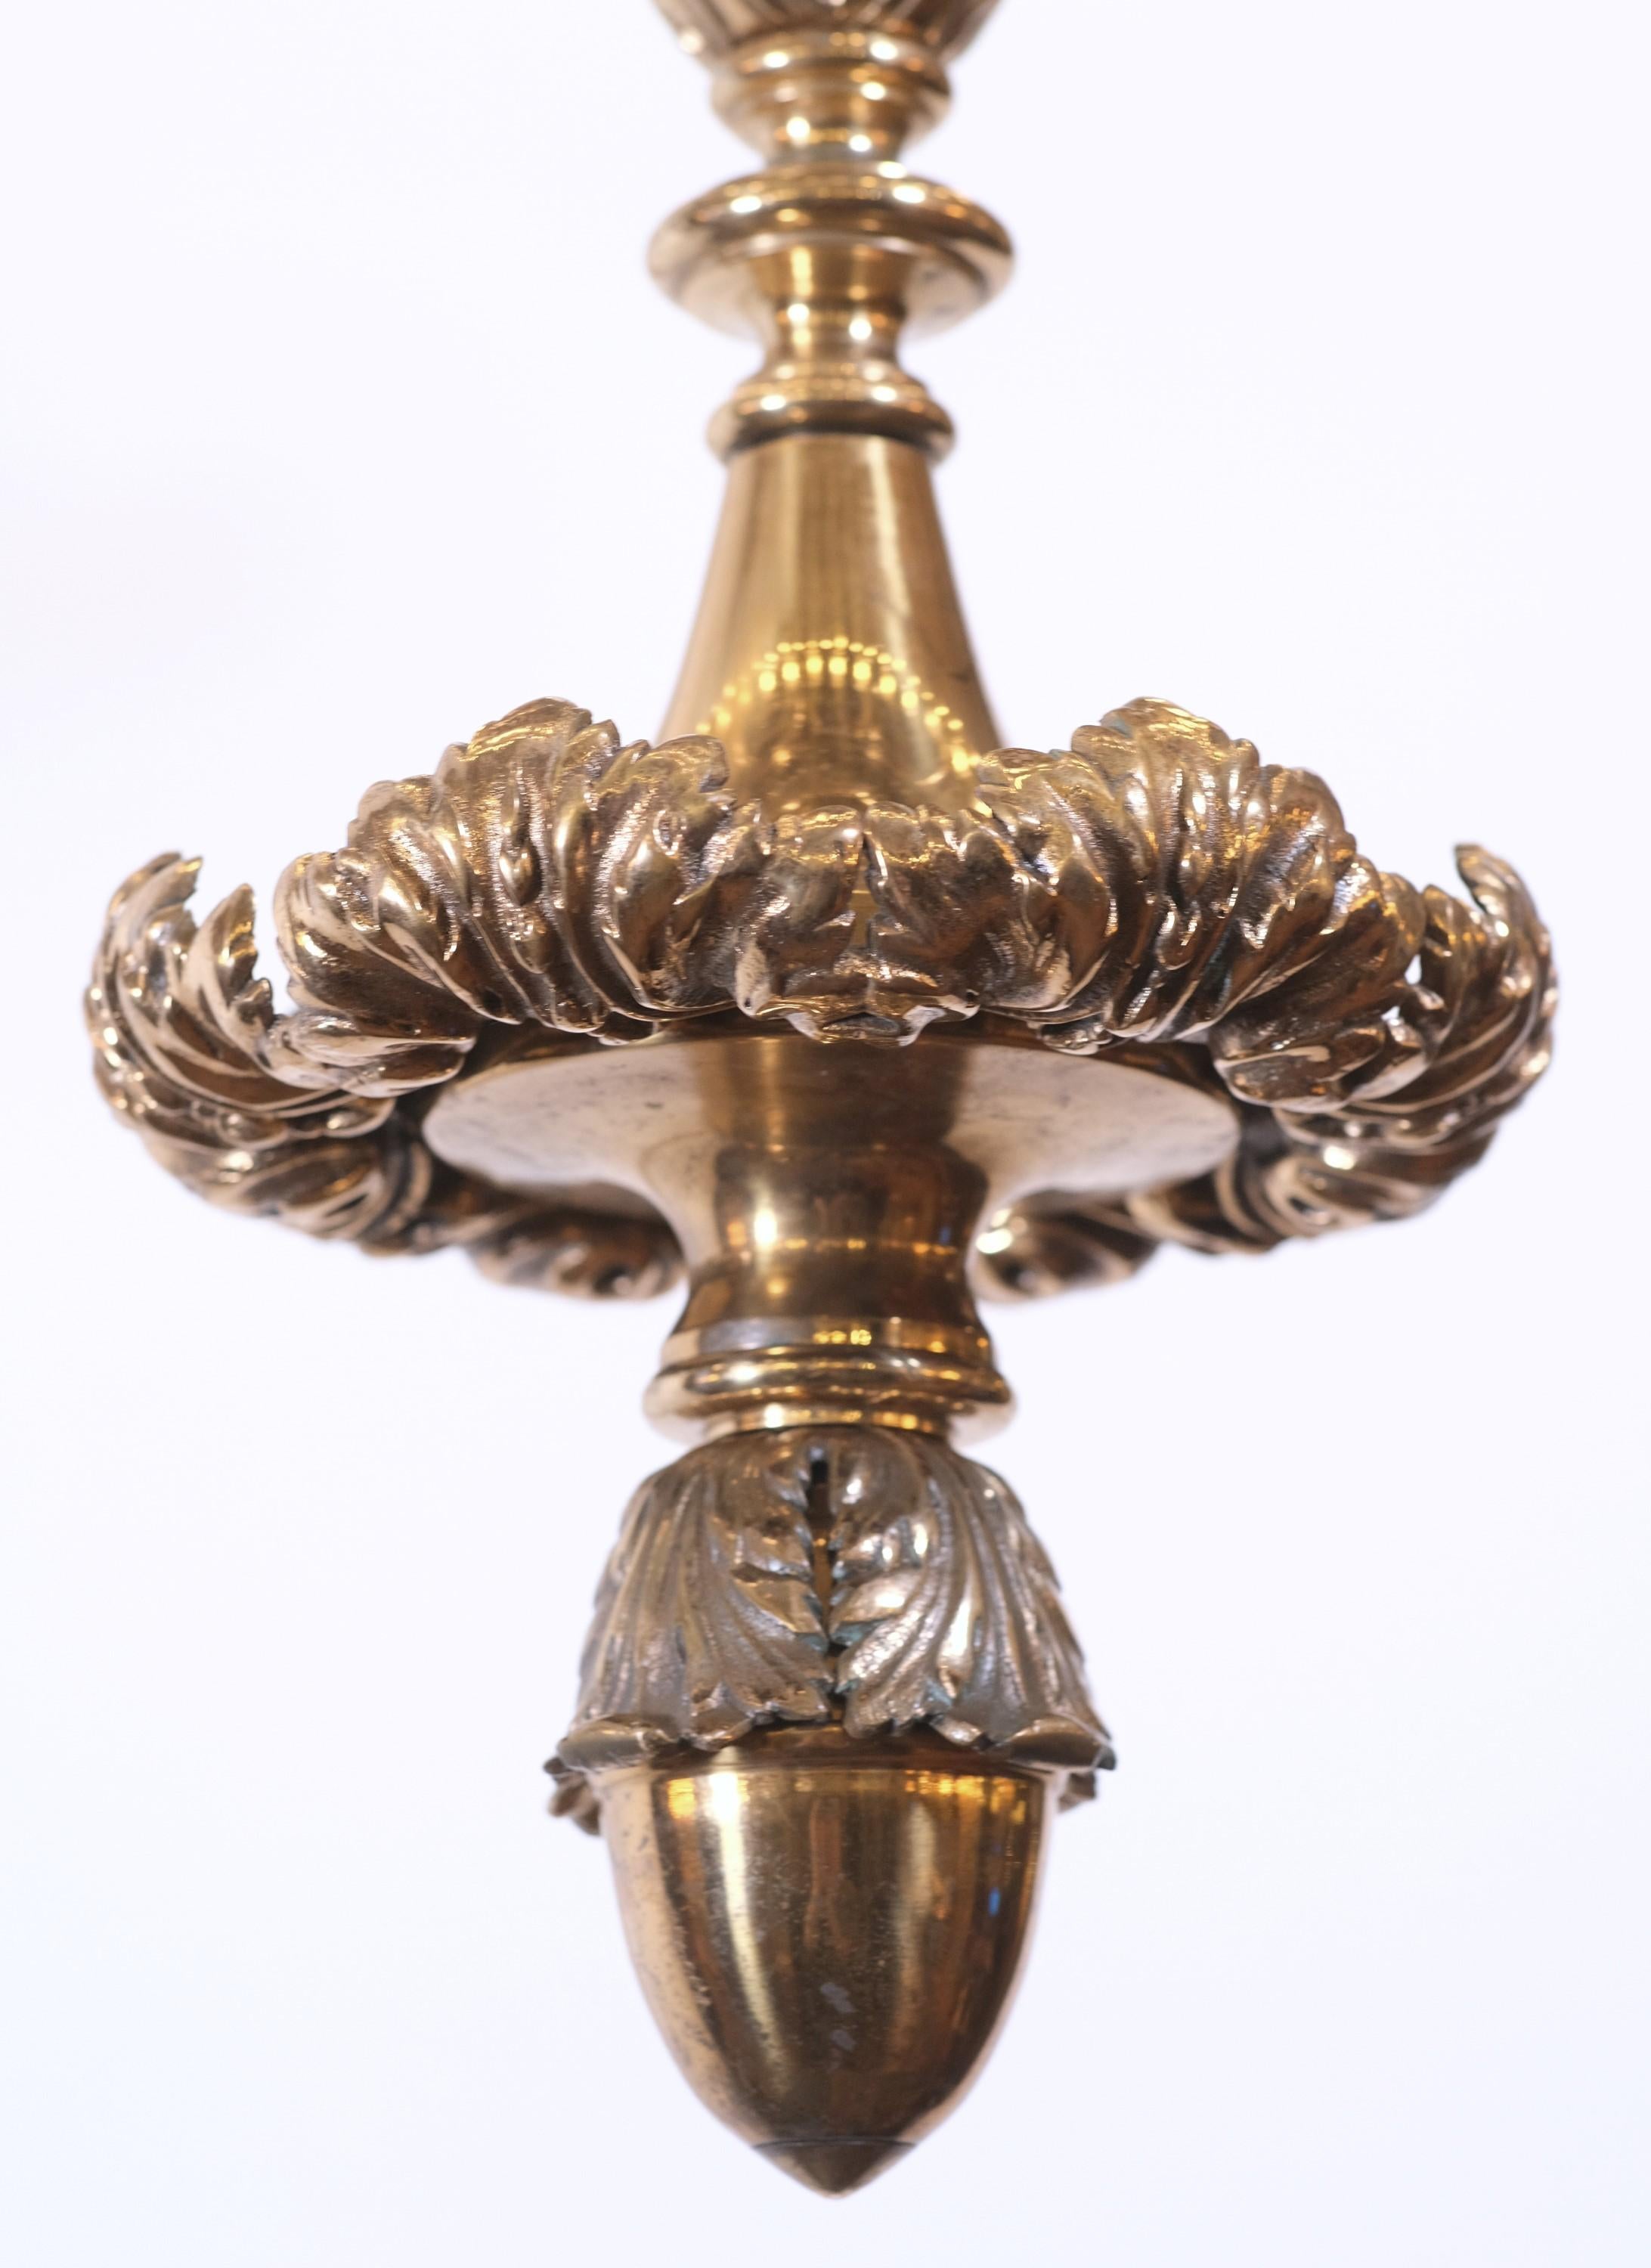 Large scale early 20th century Beaux Arts design lobby chandelier. Polished bronze with finely cast details. Takes 48 standard medium base E26 light bulbs. Cleaned and rewired. Please note, this item is located in one of our NYC locations.